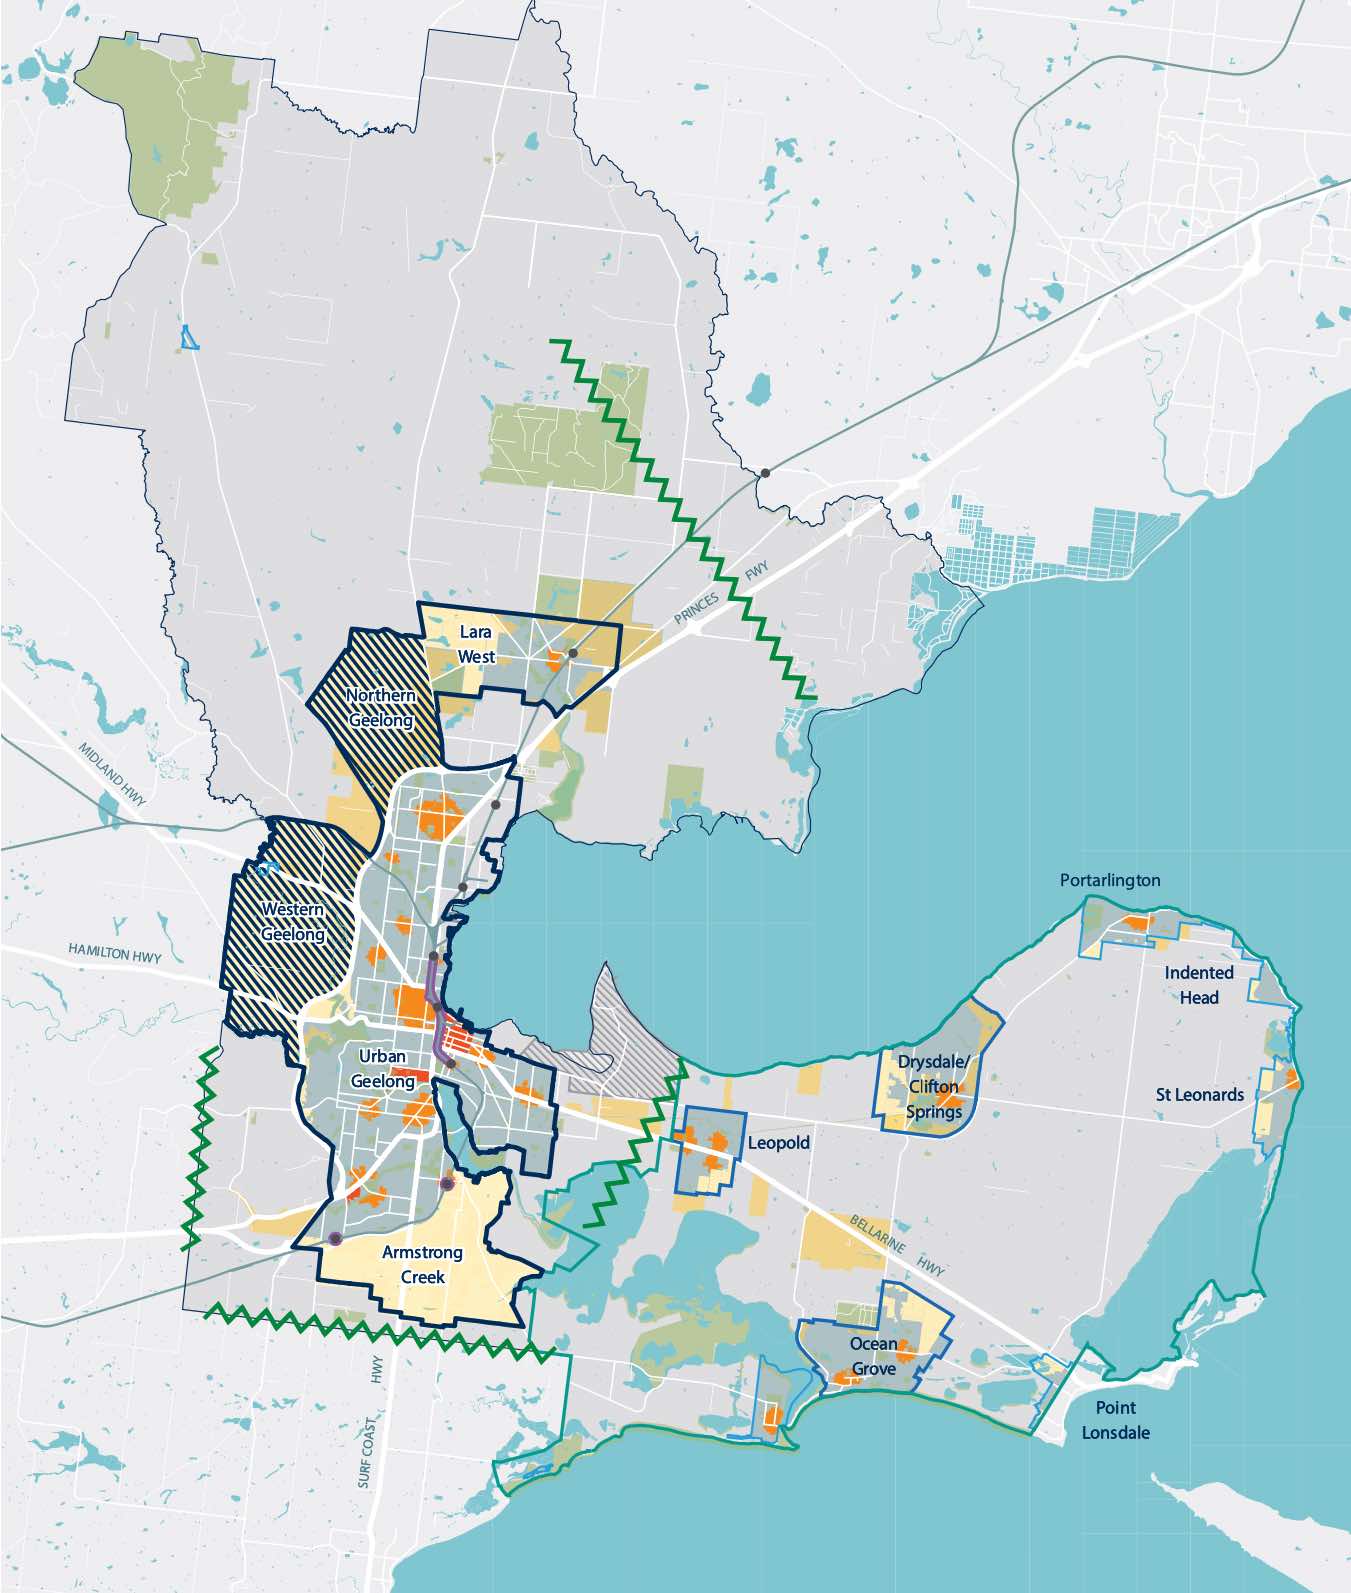 Greater Geelong Growth Areas